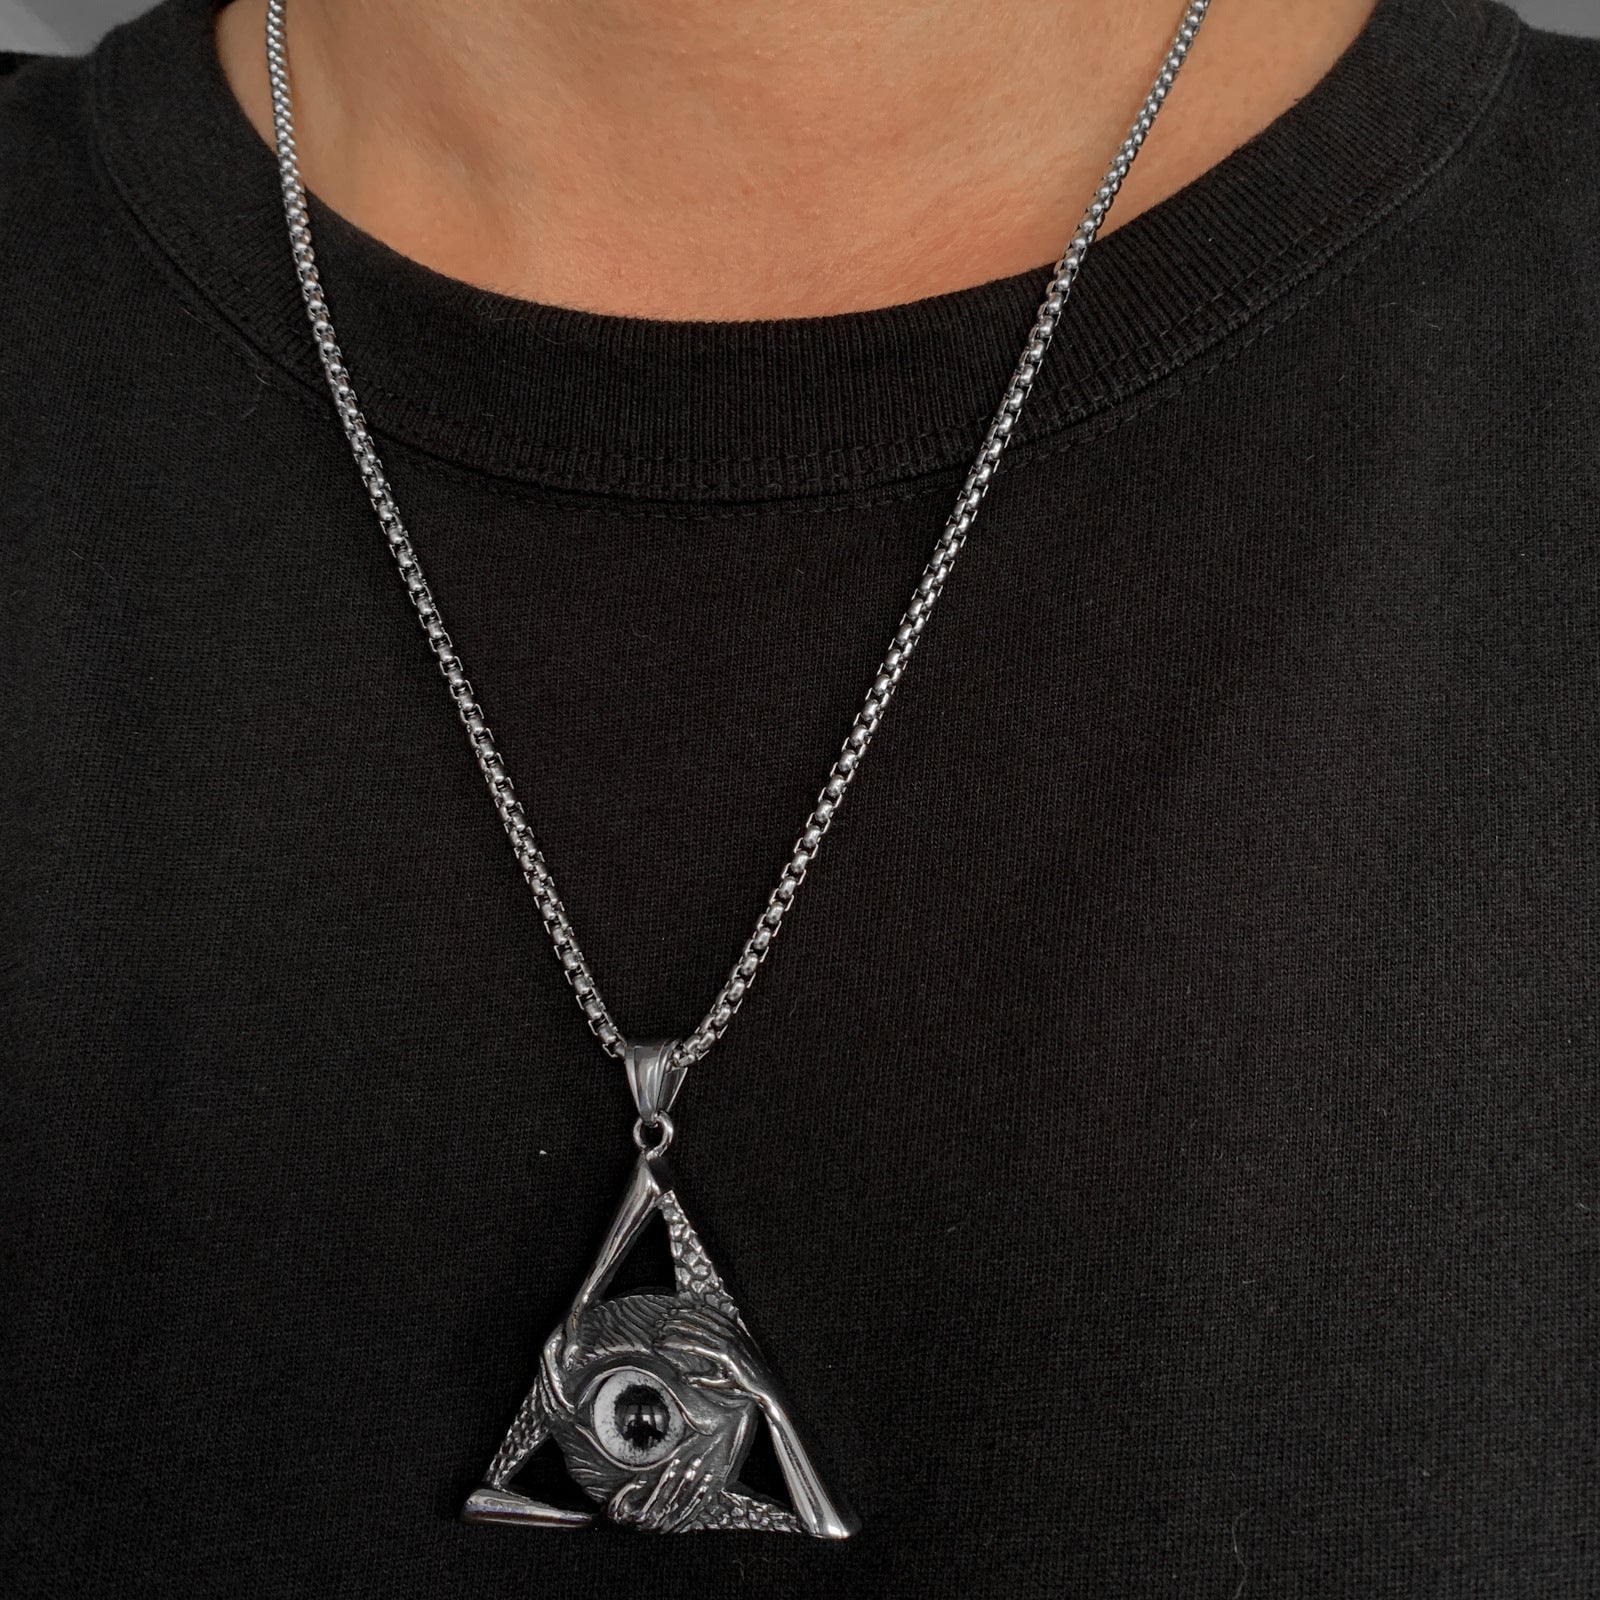 Eye Of Providence Necklace - Silver Stainless Steel White All Seeing Eye Pendant - Bricks Masons